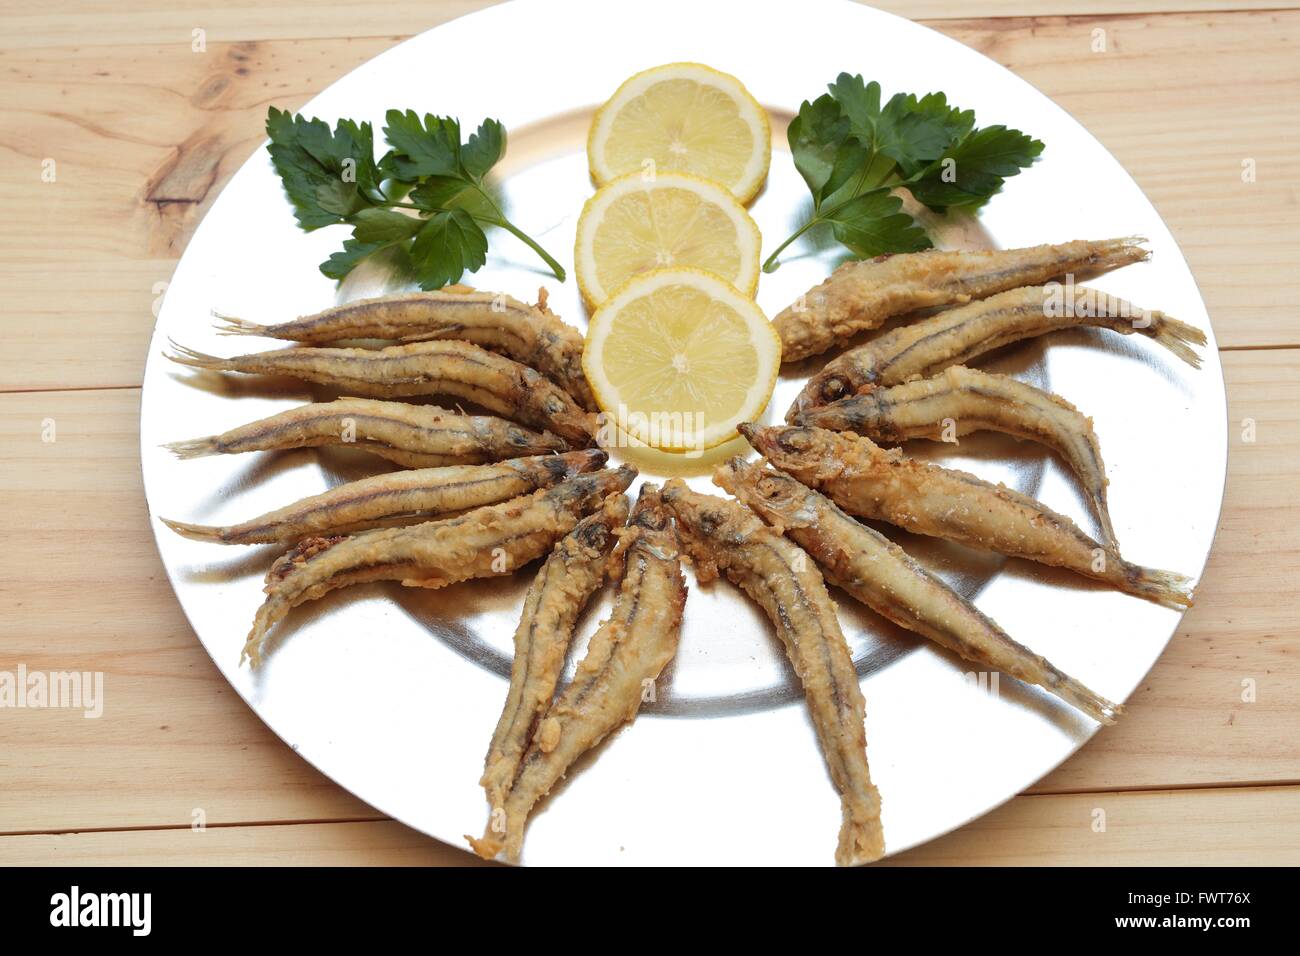 Fried fish with lemon on a silver tray Stock Photo